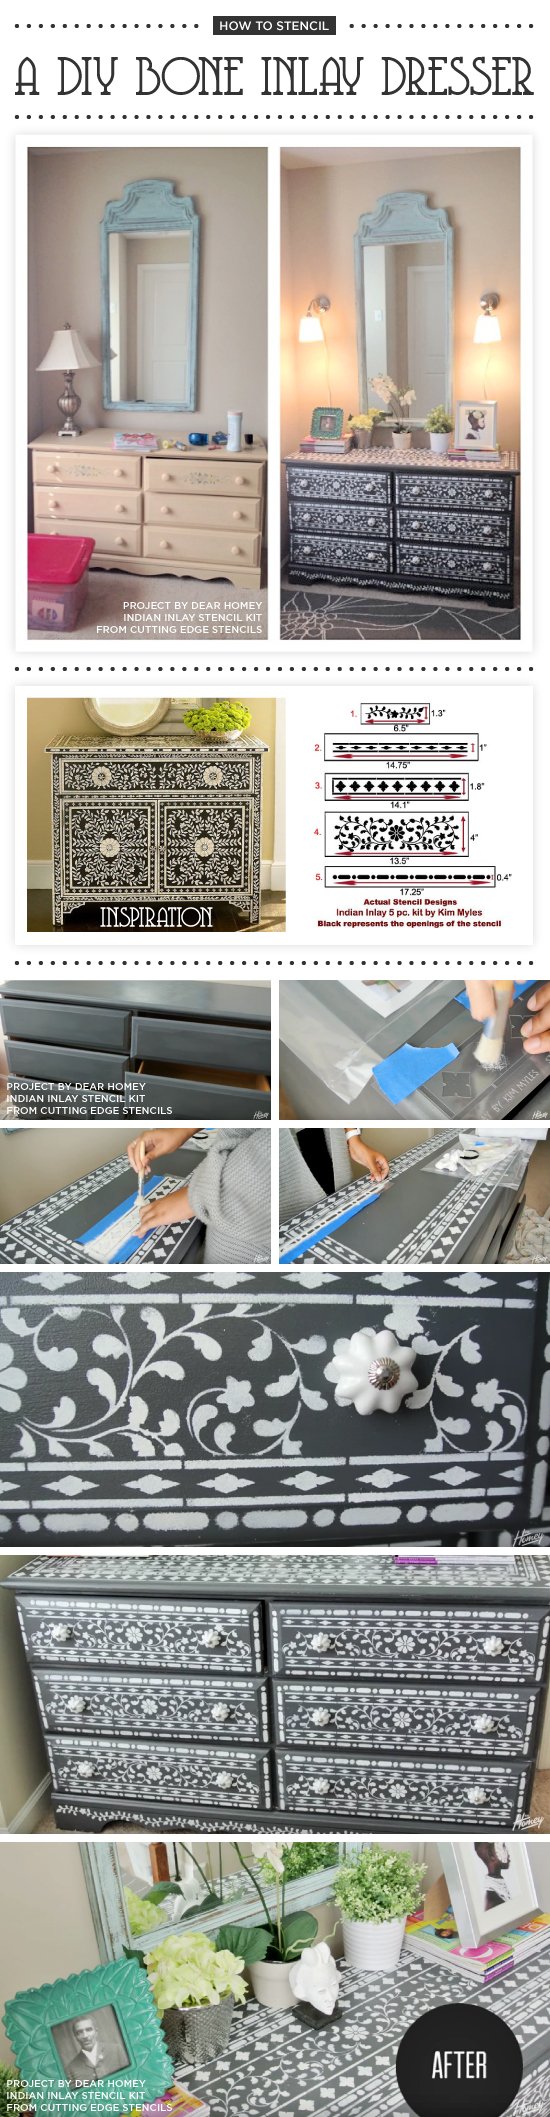 Cutting Edge Stencils shares a DIY stenciled dresser using the Indian Inlay Stencil Kit. http://www.cuttingedgestencils.com/indian-inlay-stencil-furniture.html